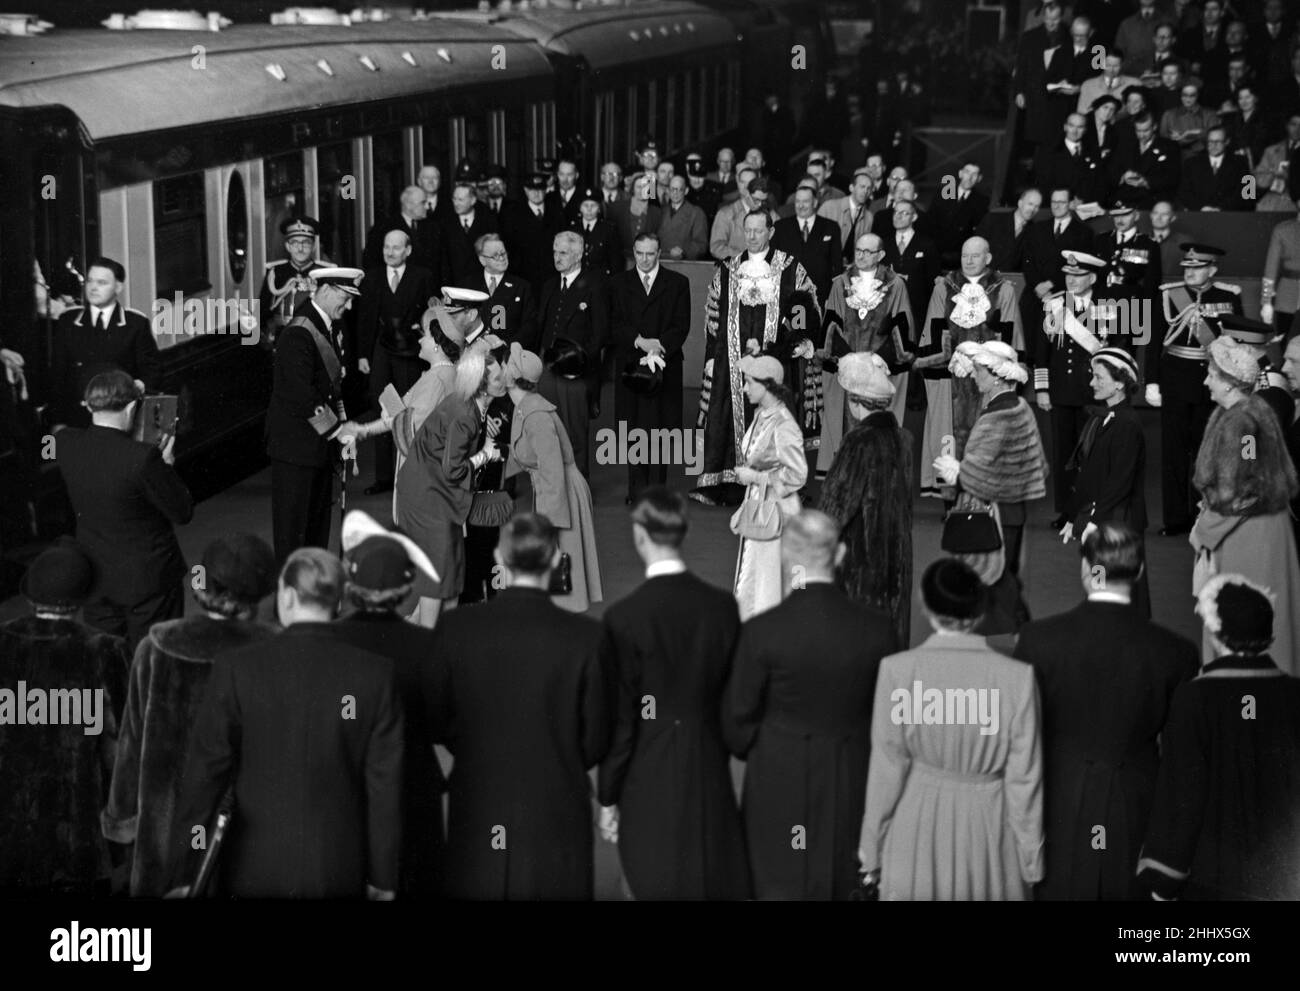 The state visit of King Frederick IX and Queen Ingrid of Denmark. Pictured on their arrival they are greeted by members of the British Royal family. 8th May 1951. Stock Photo